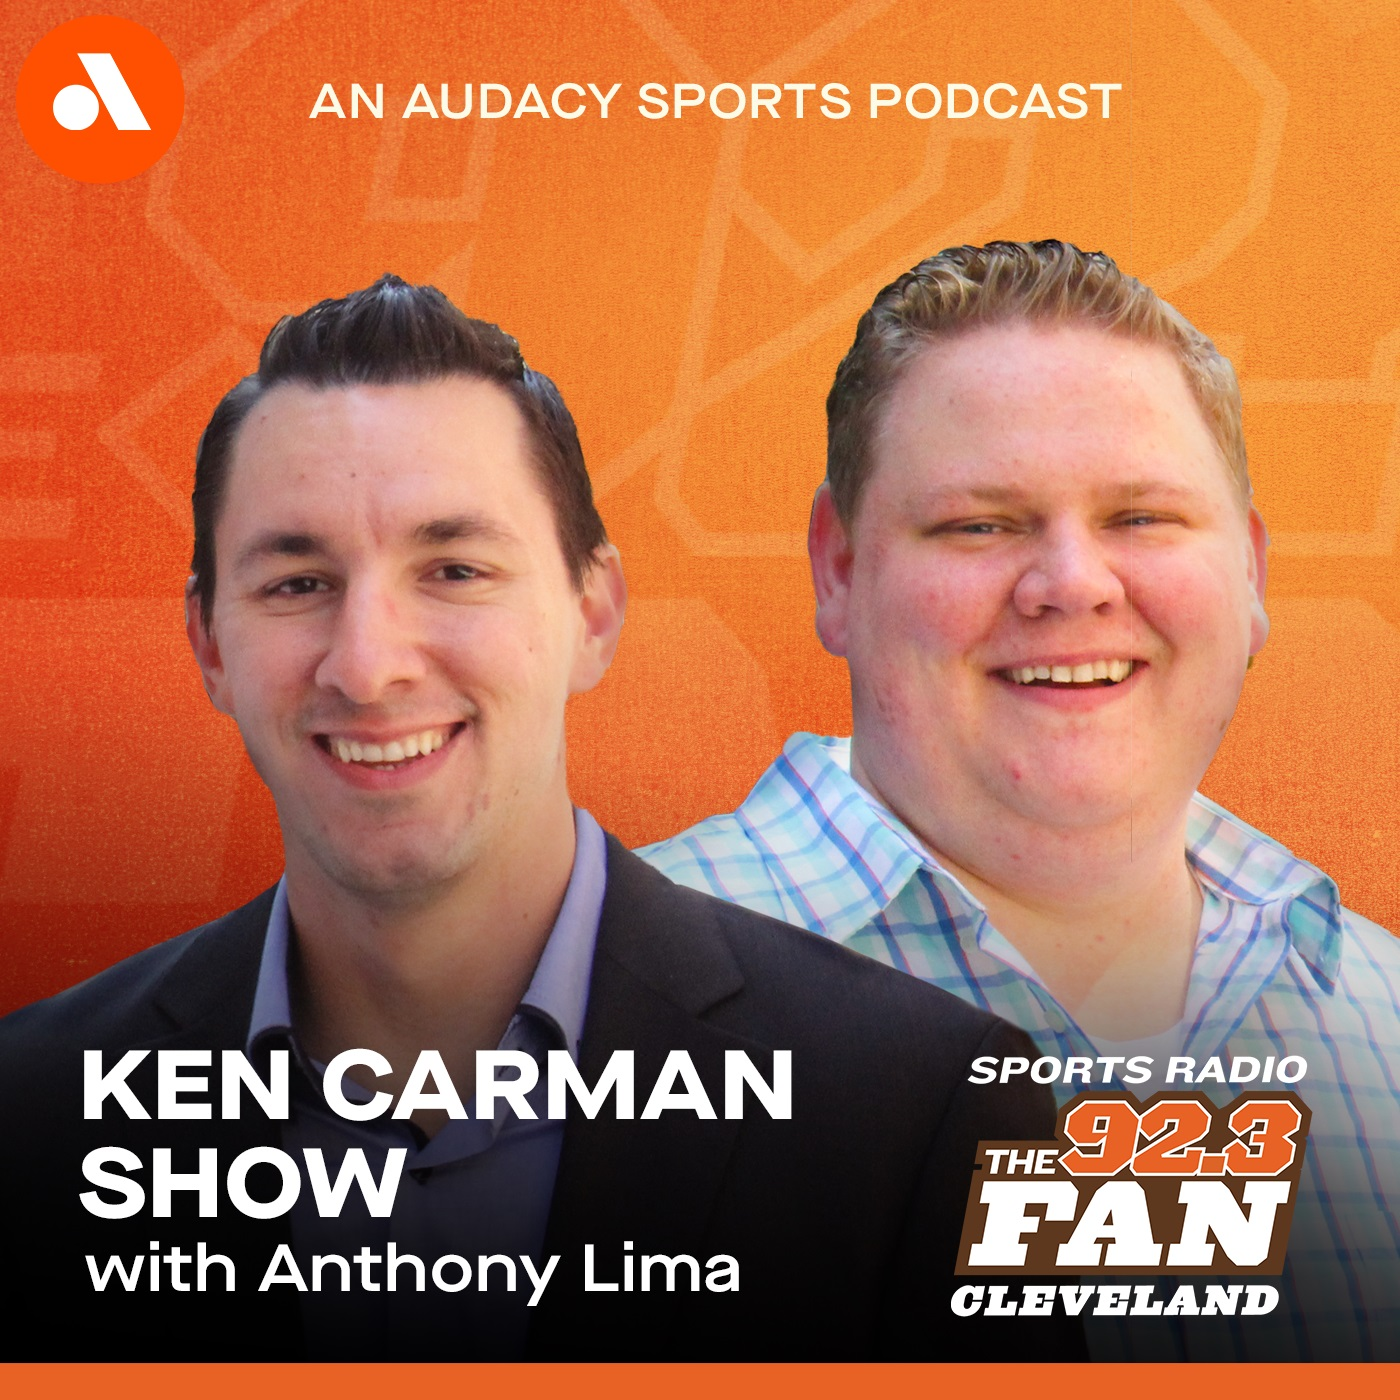 The Ken Carman Show with Anthony Lima: 7 in Heaven - Tough AFC postseason picture